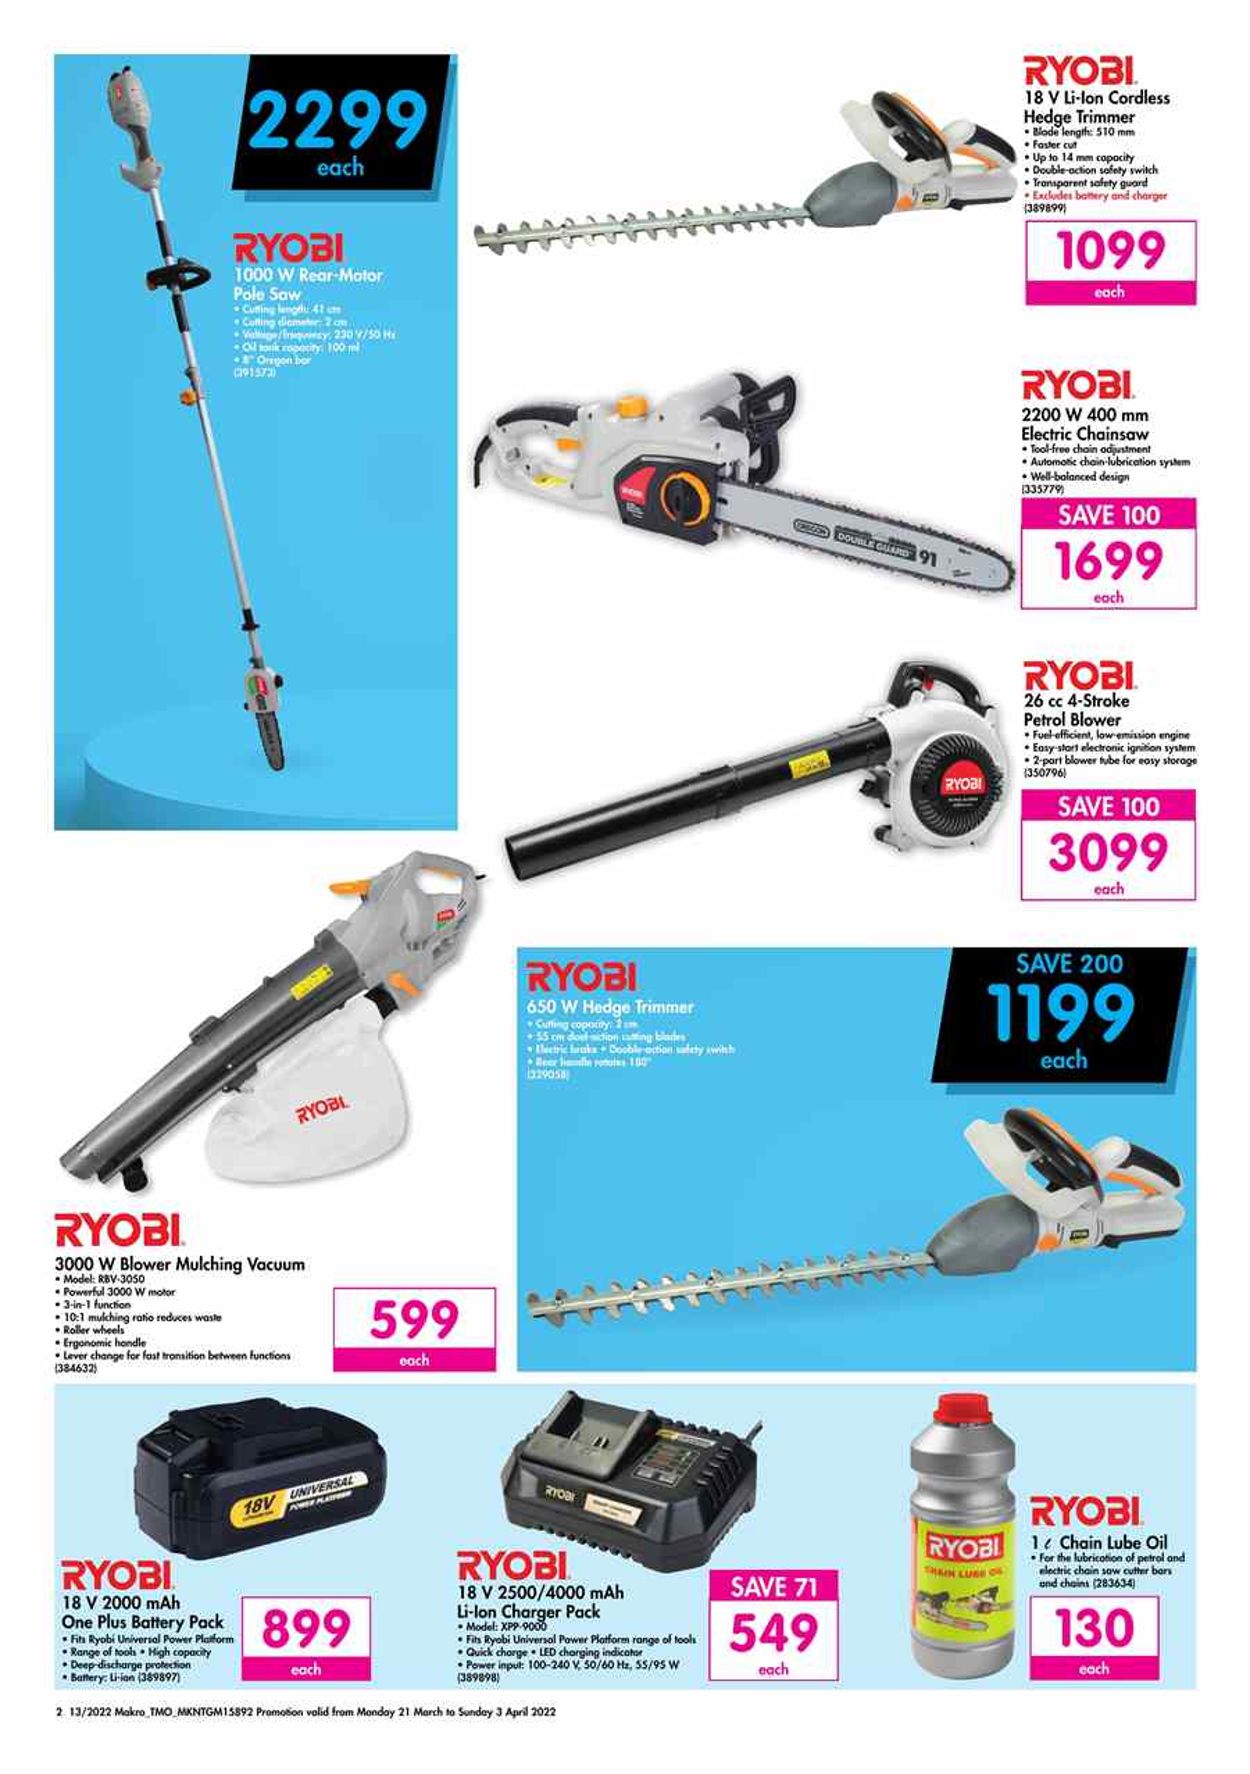 Makro Catalogue from 2022/03/21